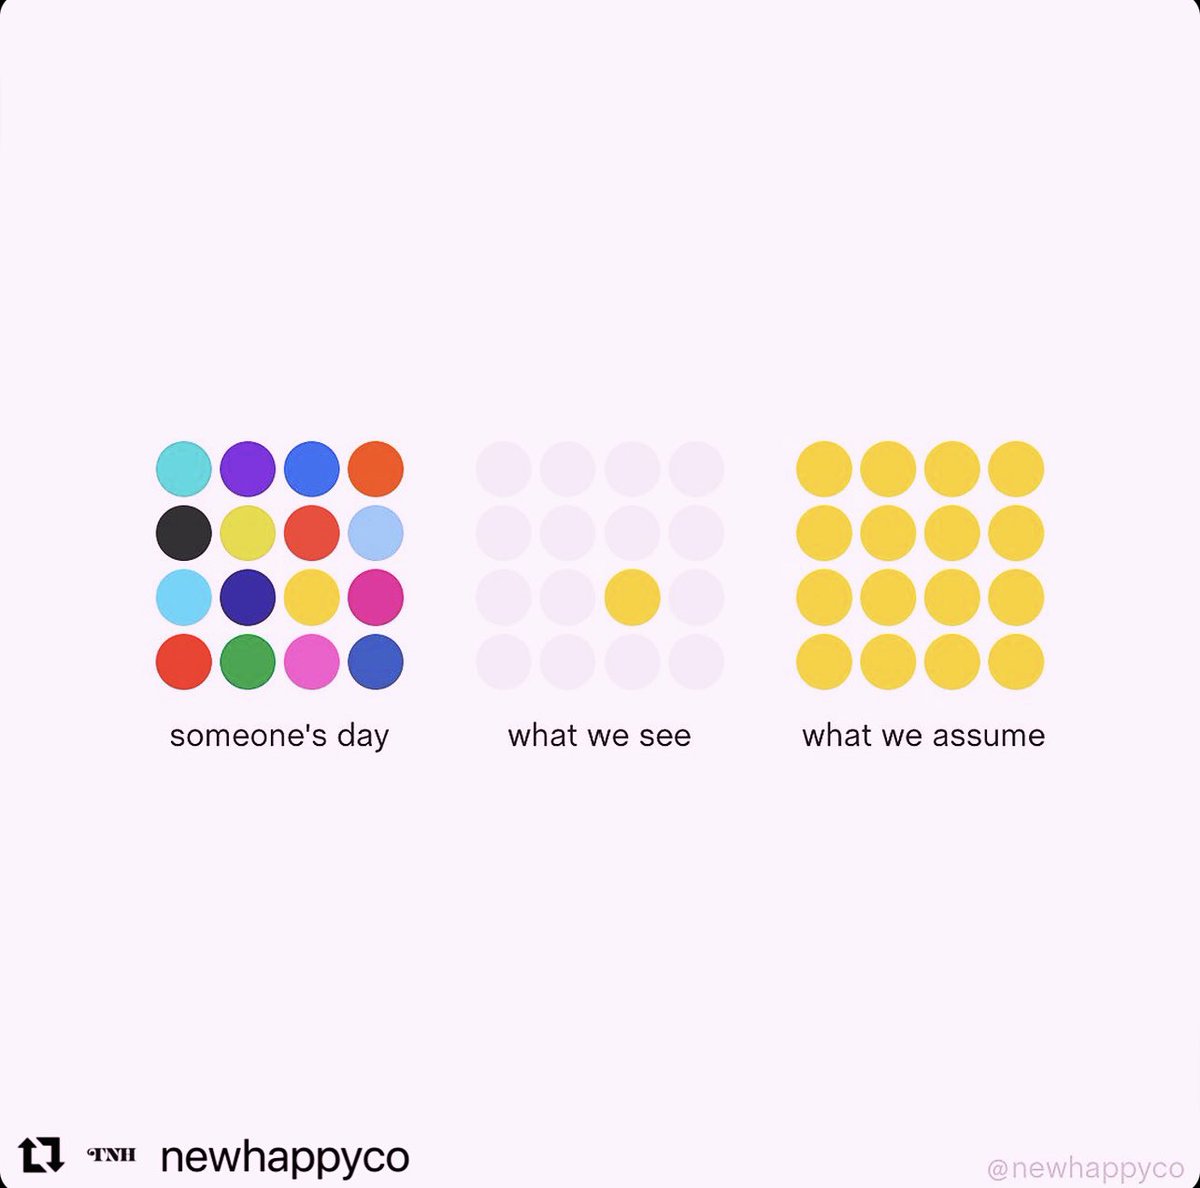 This is so true, we all do this sometimes. Useful food for thought about comparisons & assumptions. 👌🏻 Via: newhappyco on IG.